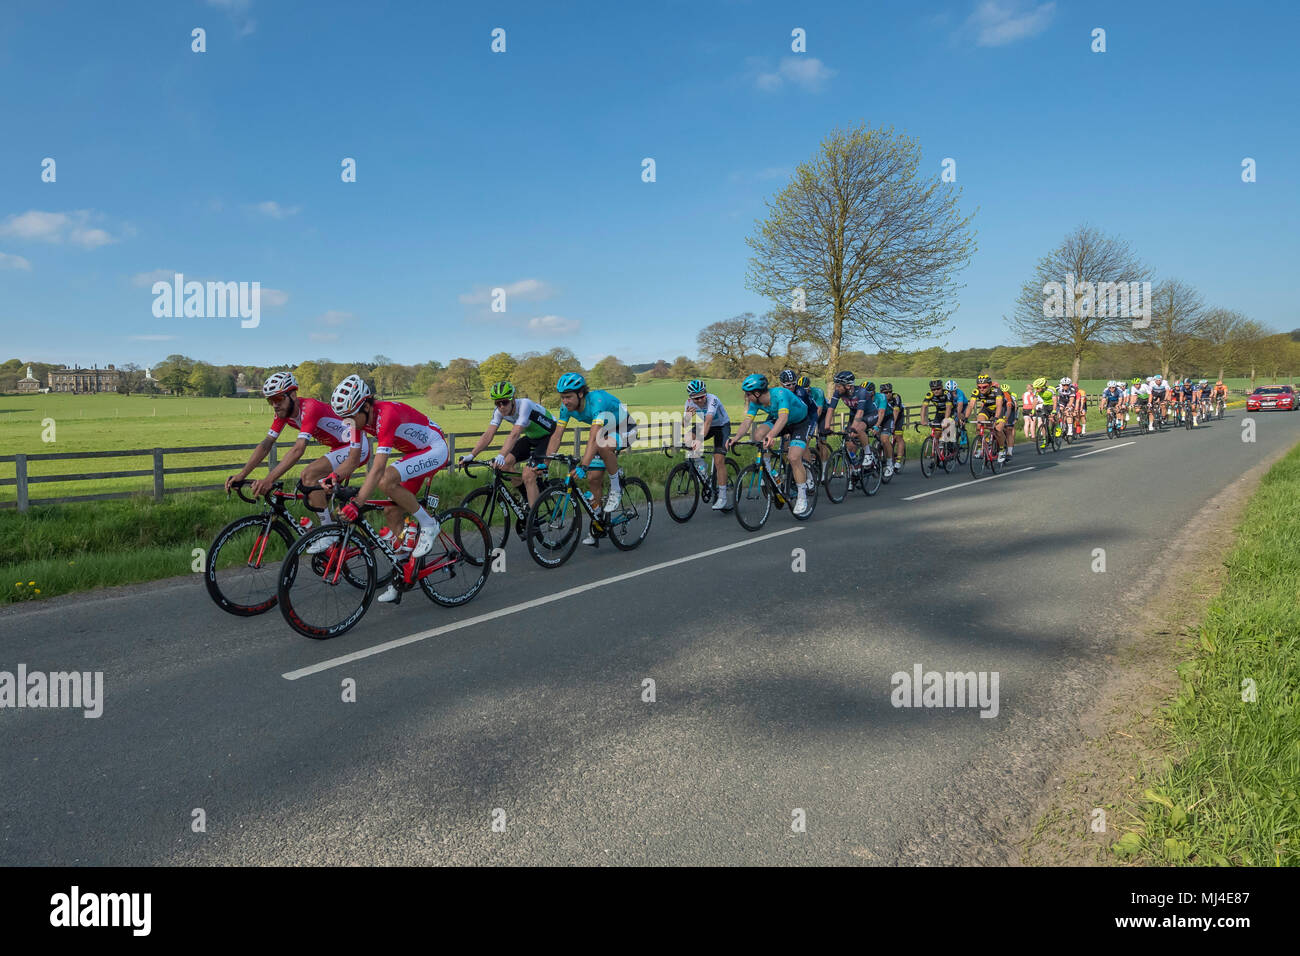 Denton, West Yorkshire, 4th May 2018. Under a blue sky, a large group of male cyclists in the pelaton, competing in the sunny Tour de Yorkshire 2018, are racing past Denton Hall, on a straight, flat, scenic, countryside lane near Ilkley, North Yorkshire, England, UK. Credit: Ian Lamond/Alamy Live News Stock Photo